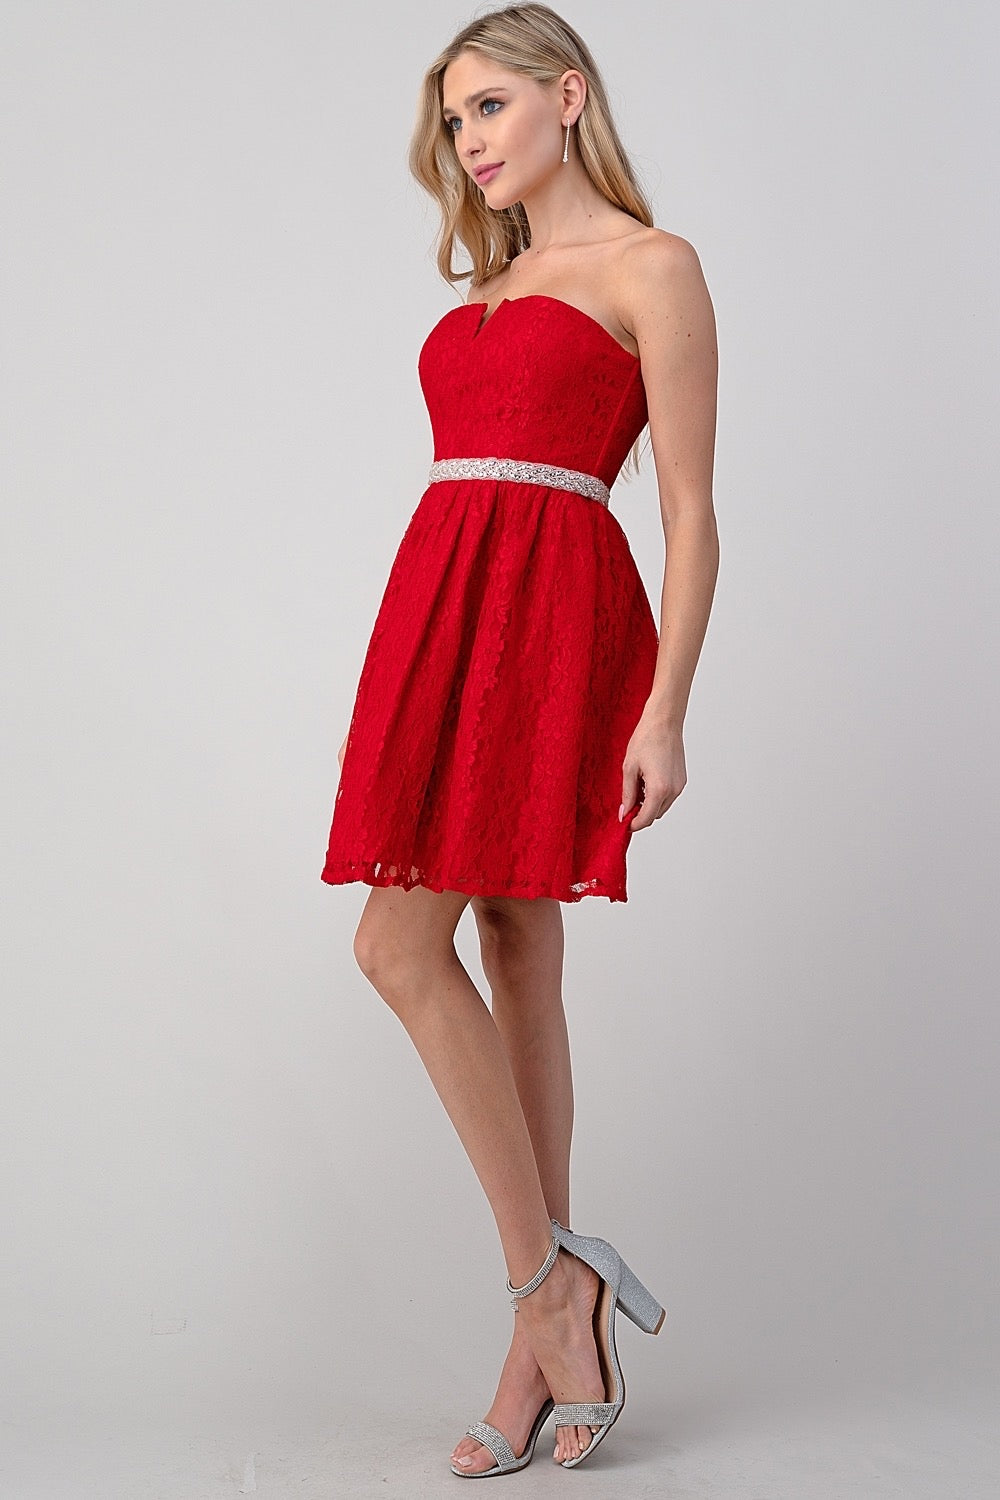 Red Strapless Lace Dress